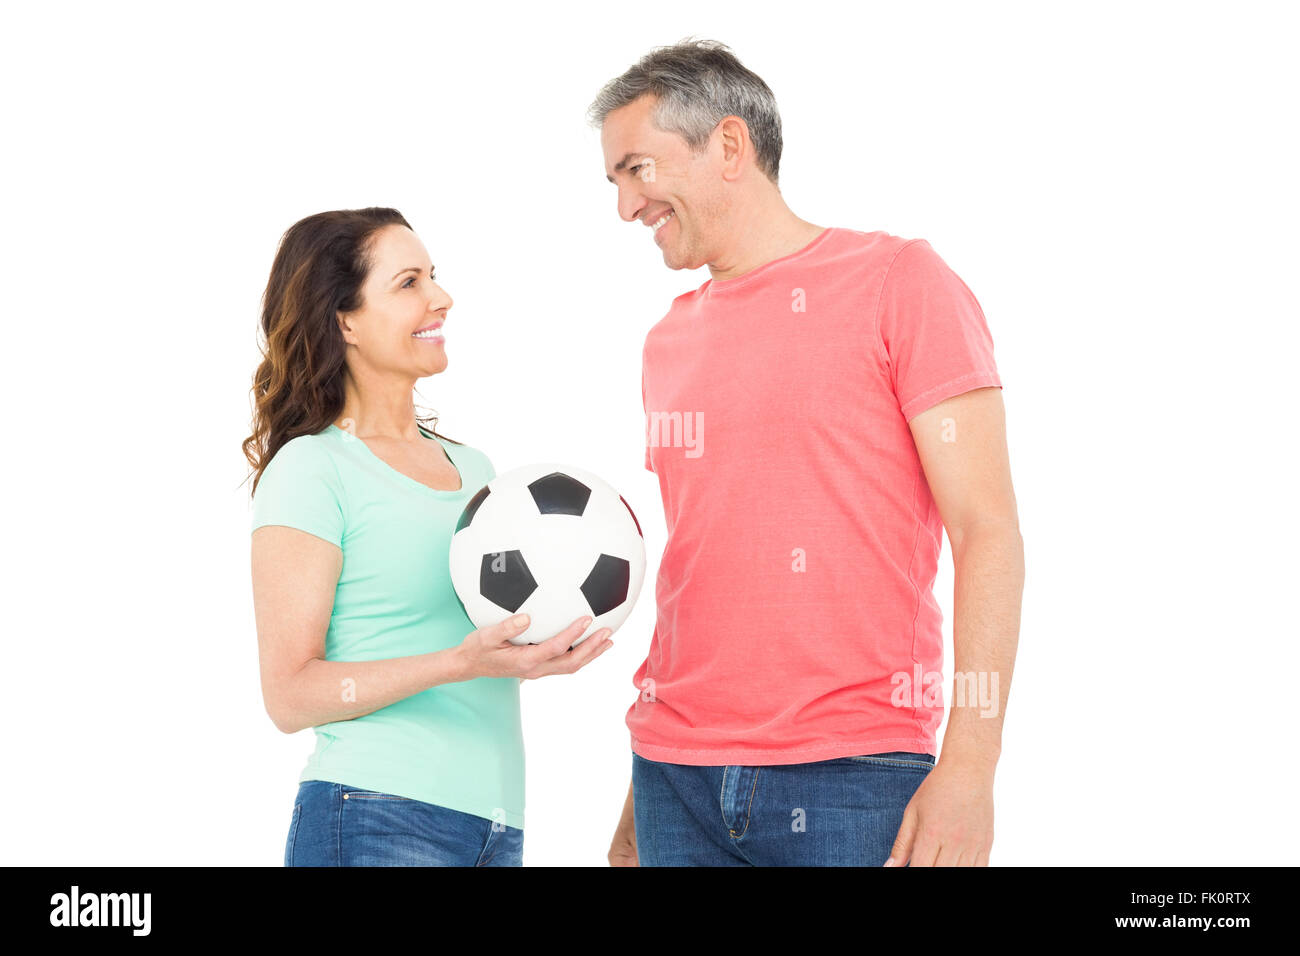 Excited football fan couple cheering at camera Stock Photo